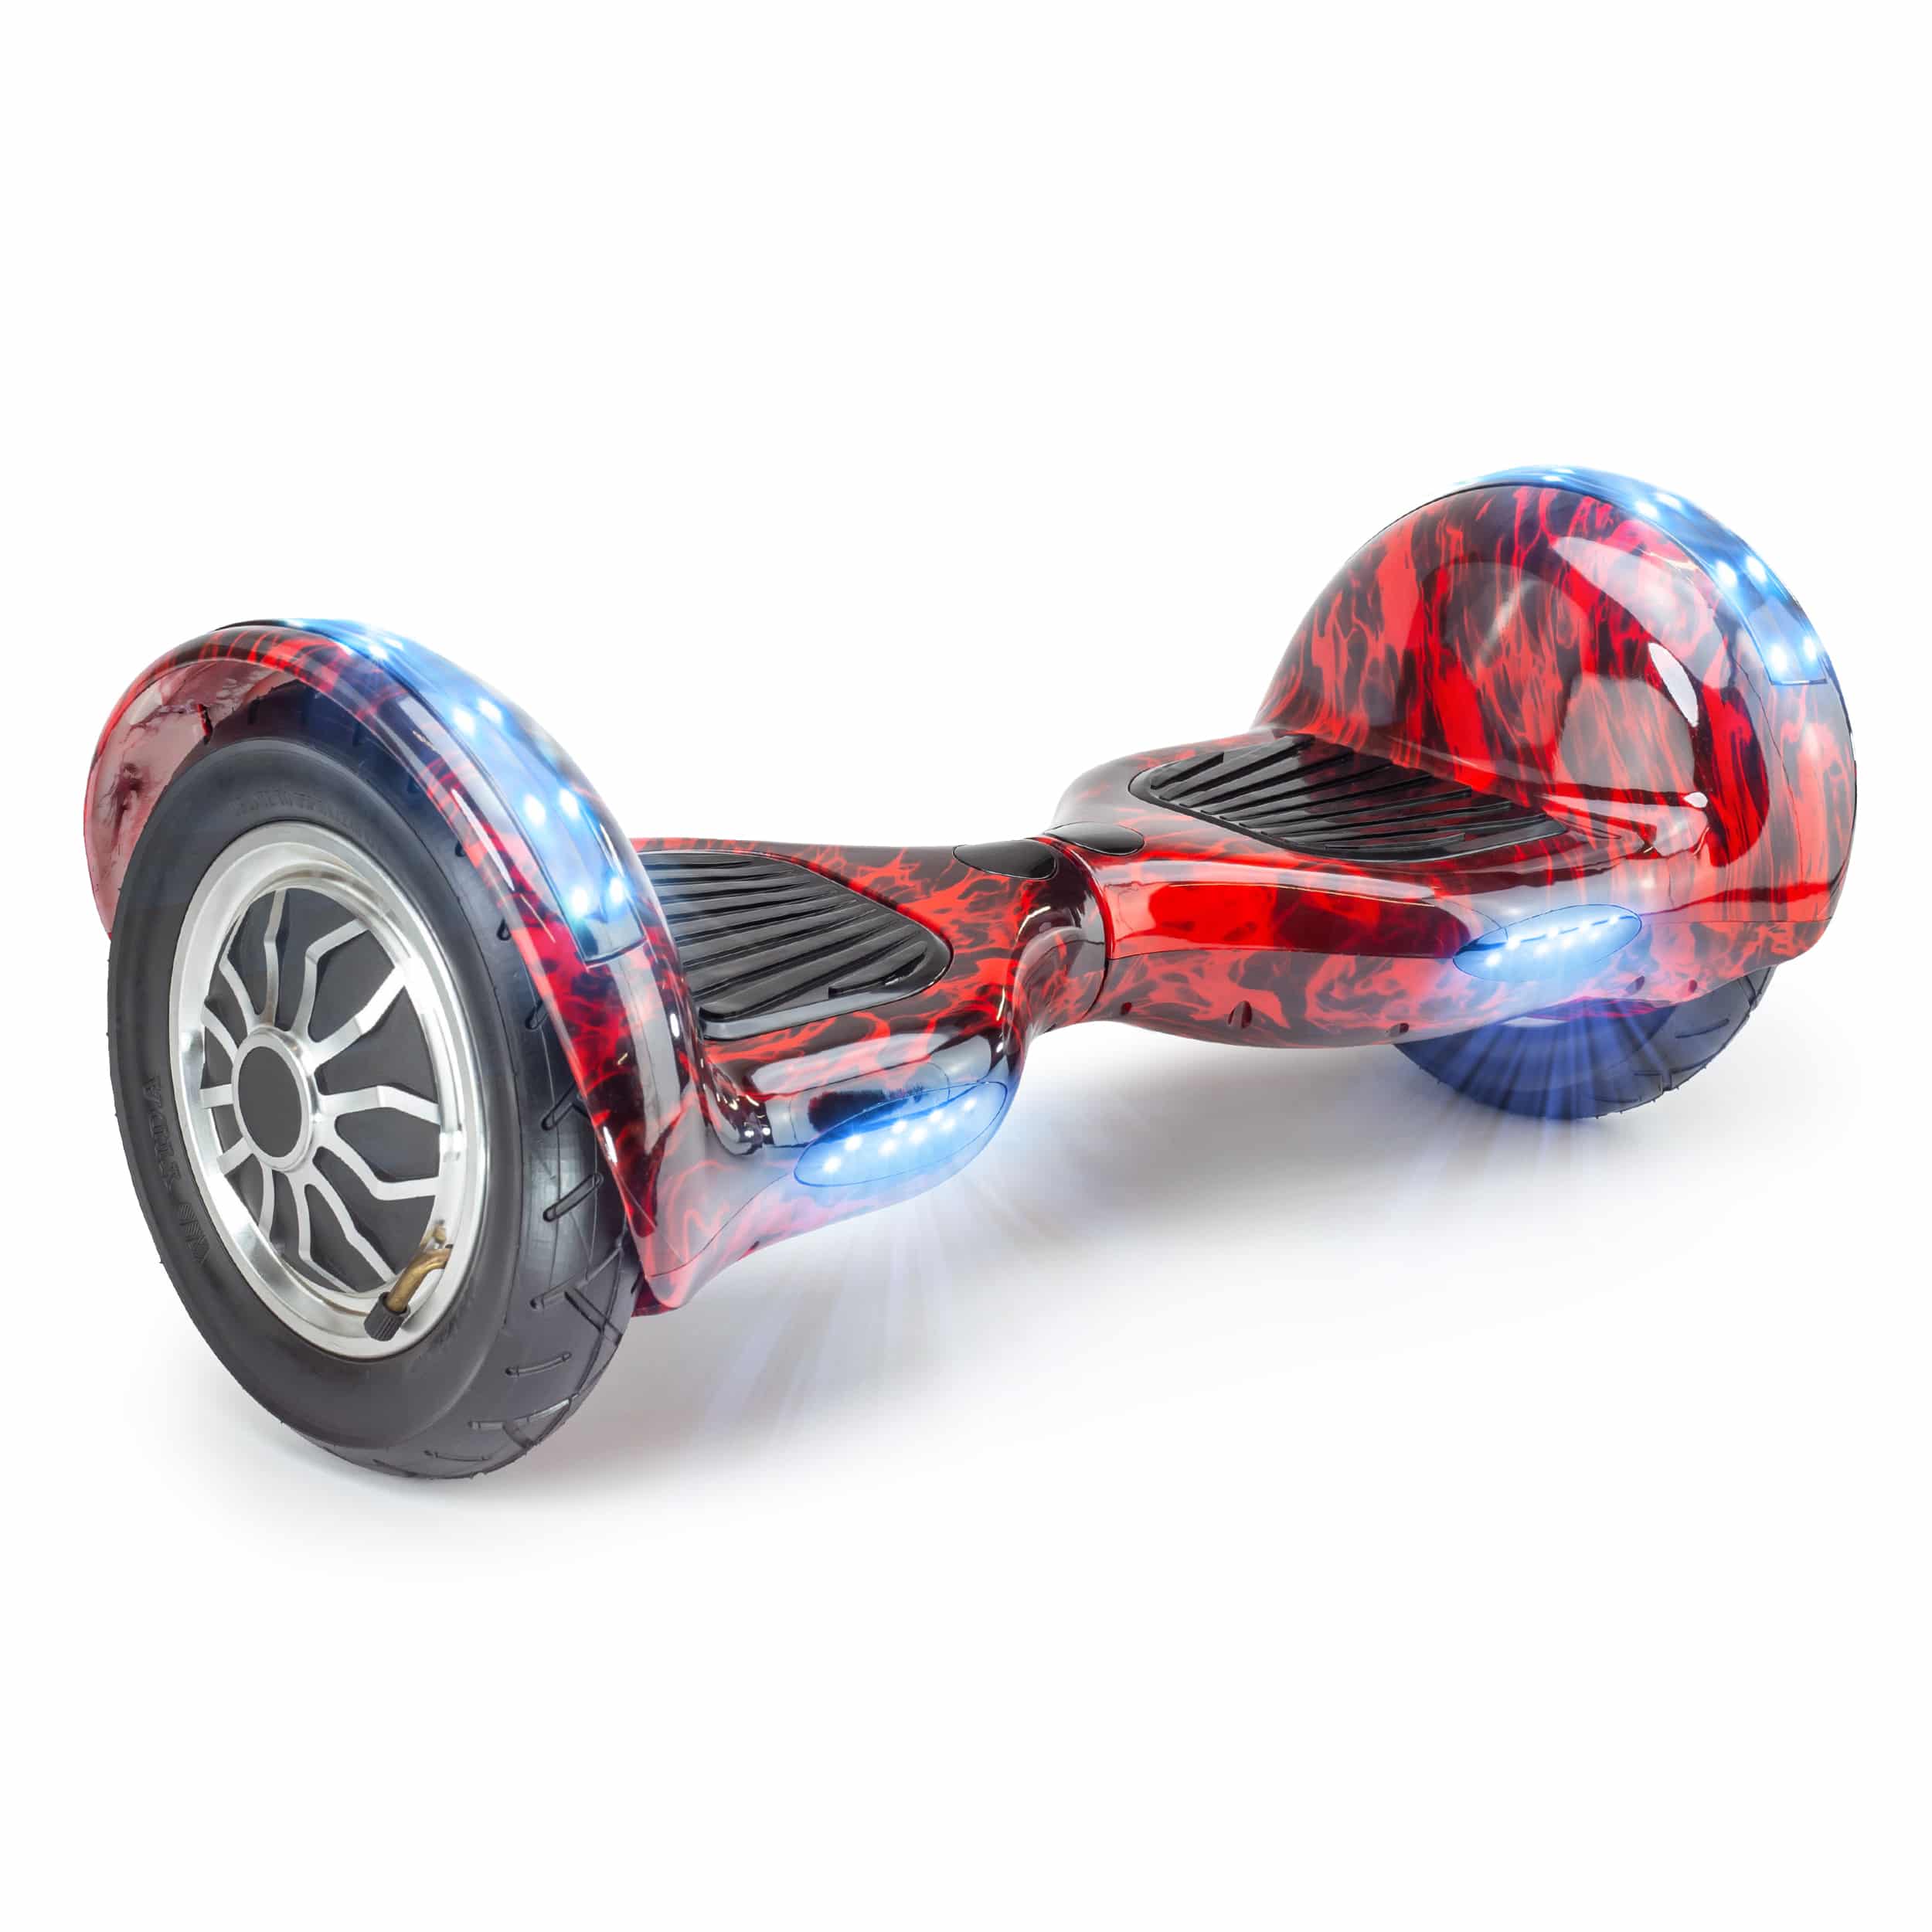 LED Wheels and LED Lights YHR Hoverboard UL Certified 2272 Bluetooth W/Speaker Self Balancing Scooter 6.5 2 Wheel Electric Scooter 